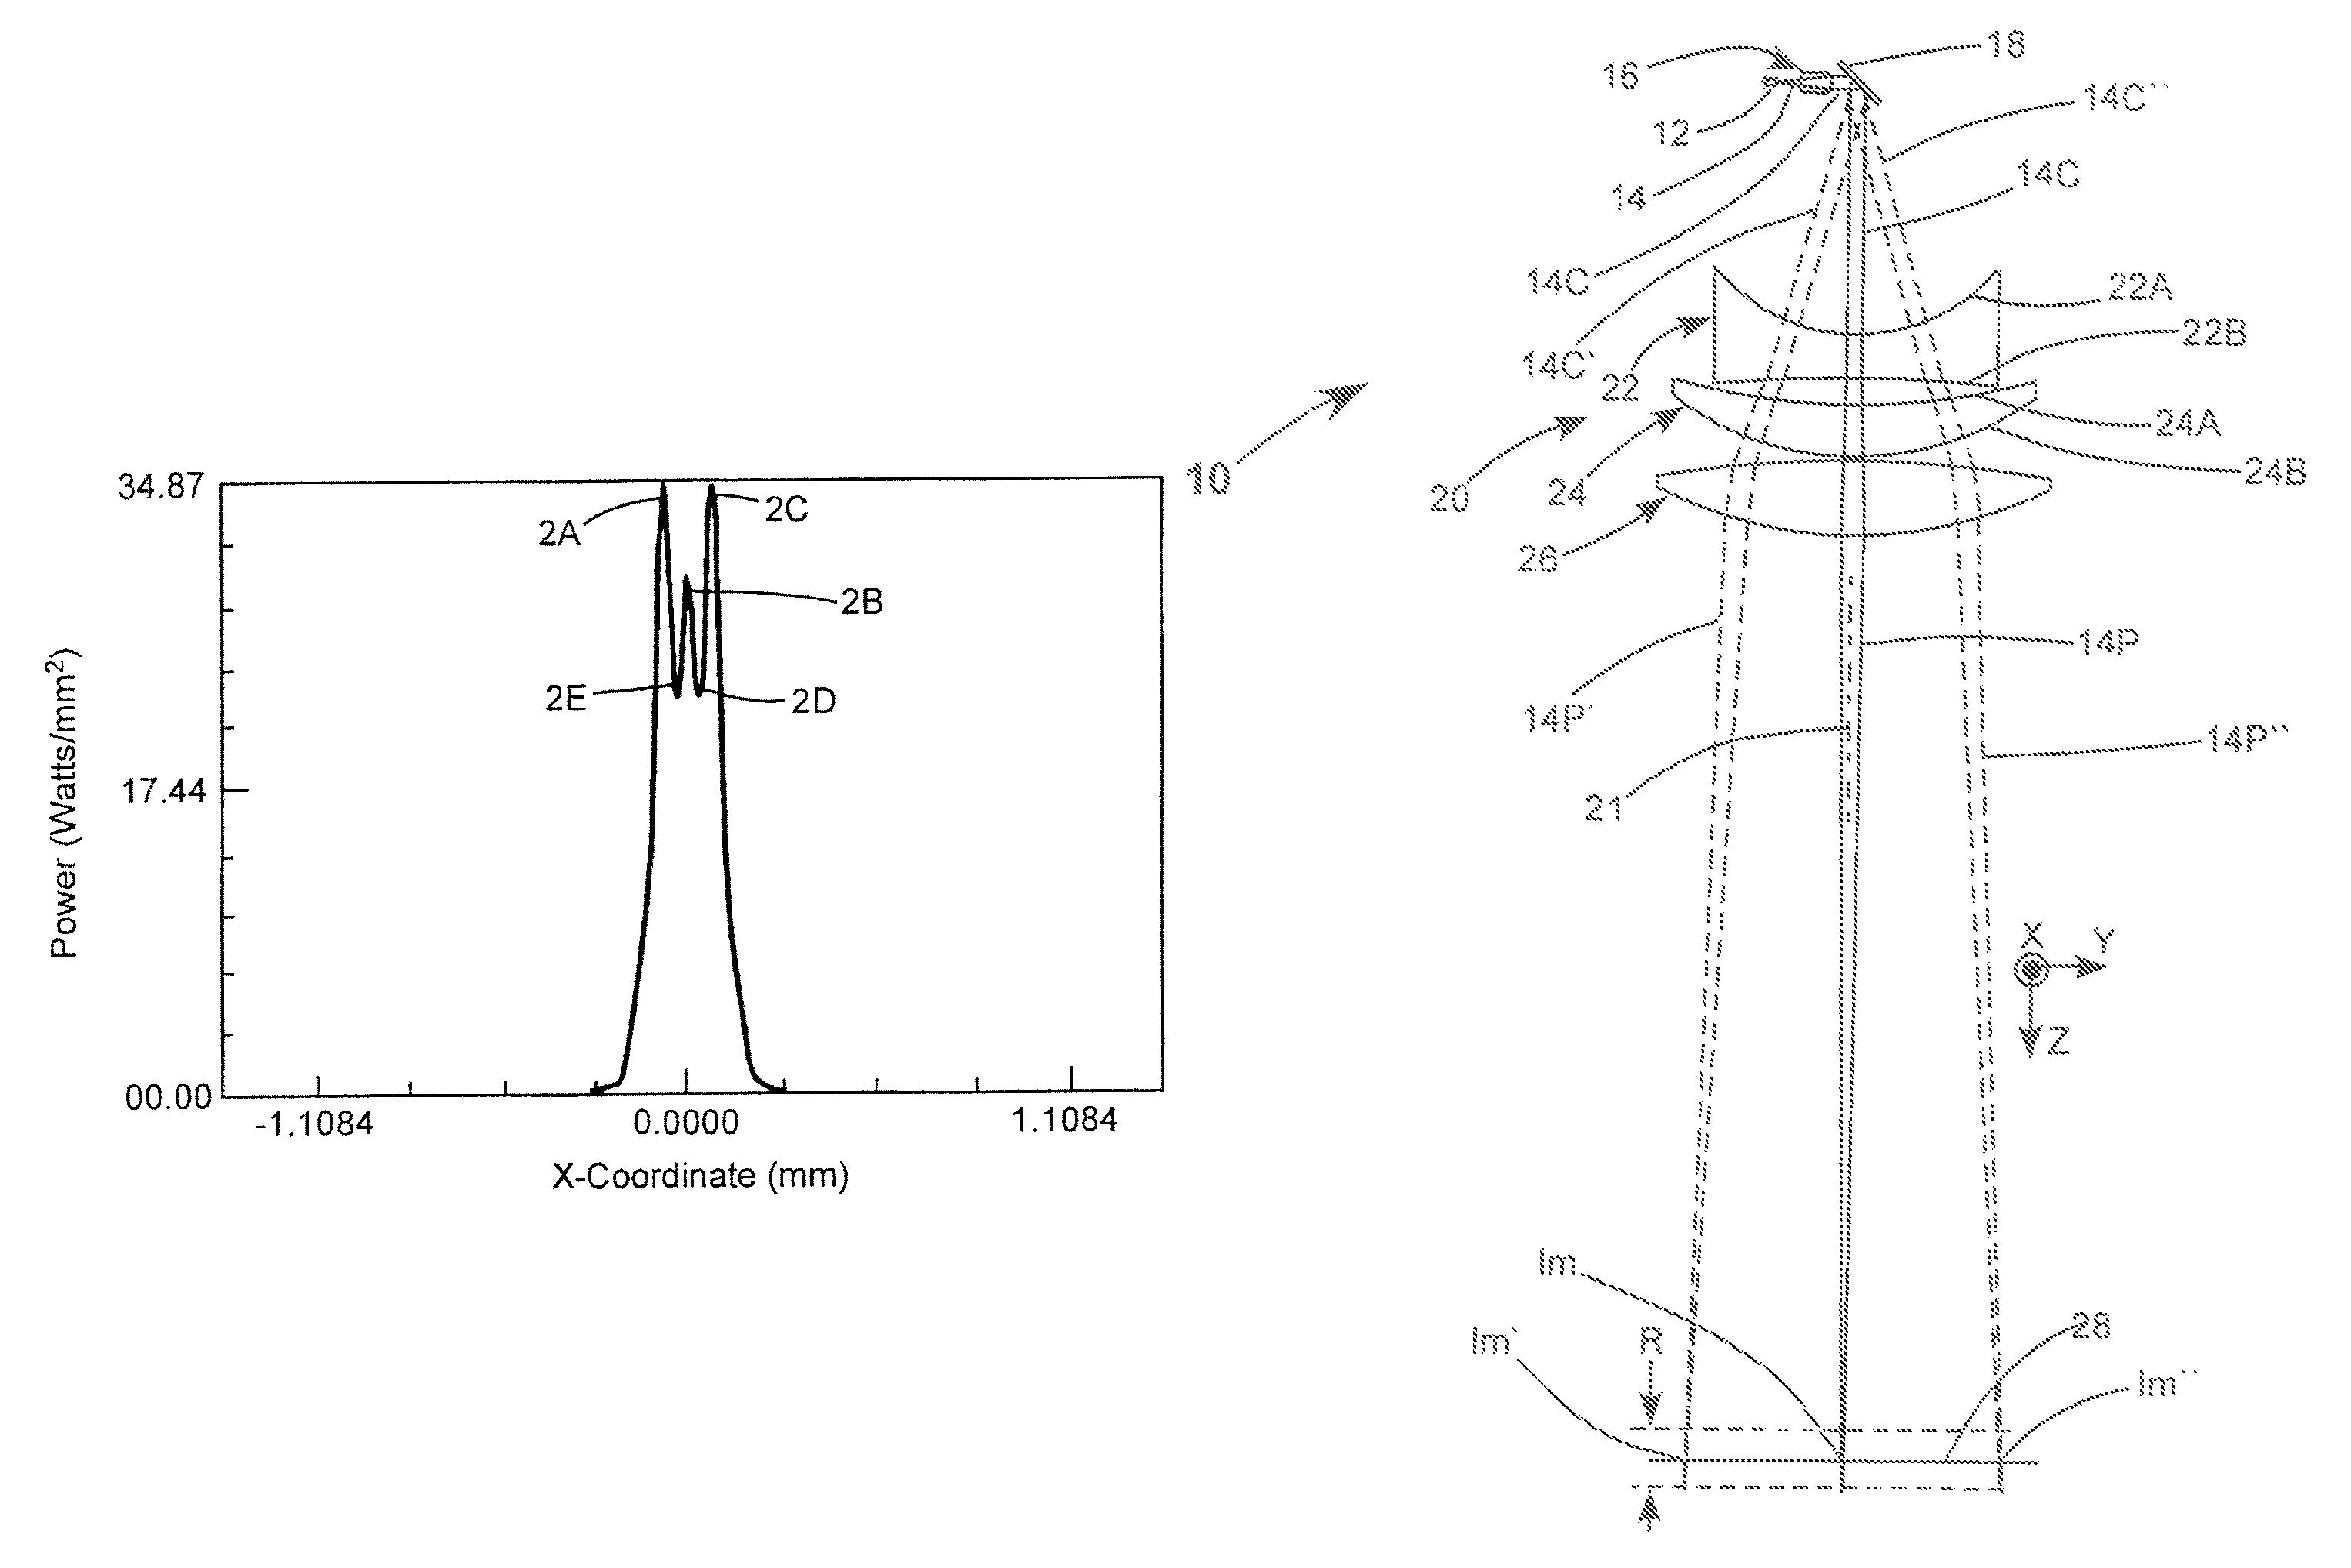 Optical system having aberrations for transforming a Gaussian laser-beam intensity profile to a quasi-flat-topped intensity profile in a focal region of the optical system